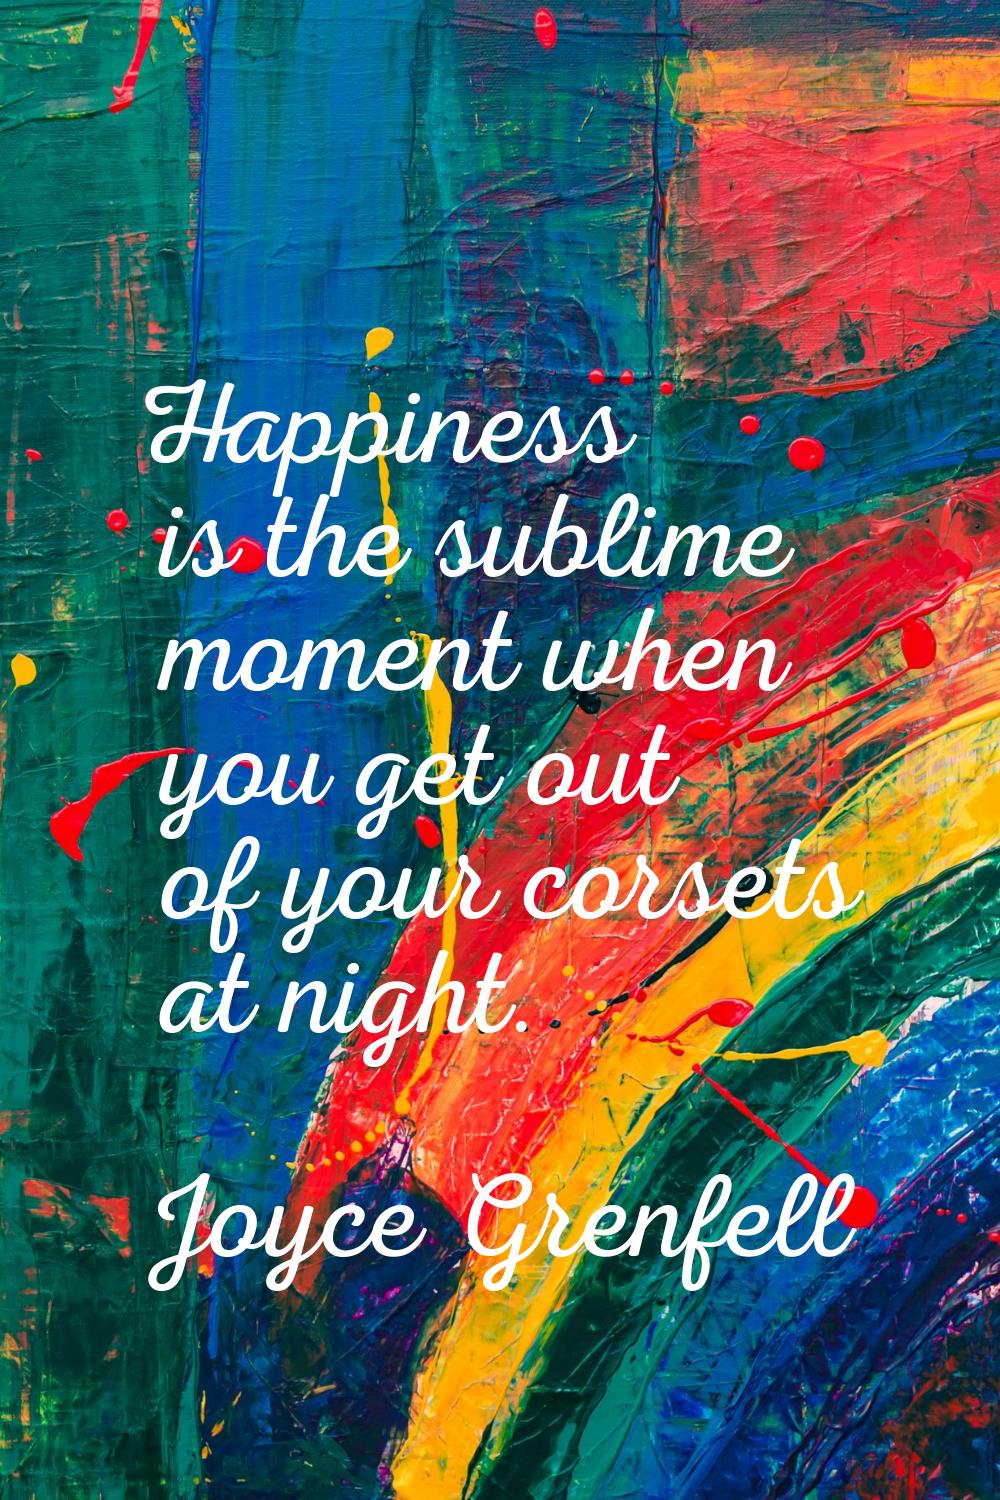 Happiness is the sublime moment when you get out of your corsets at night.